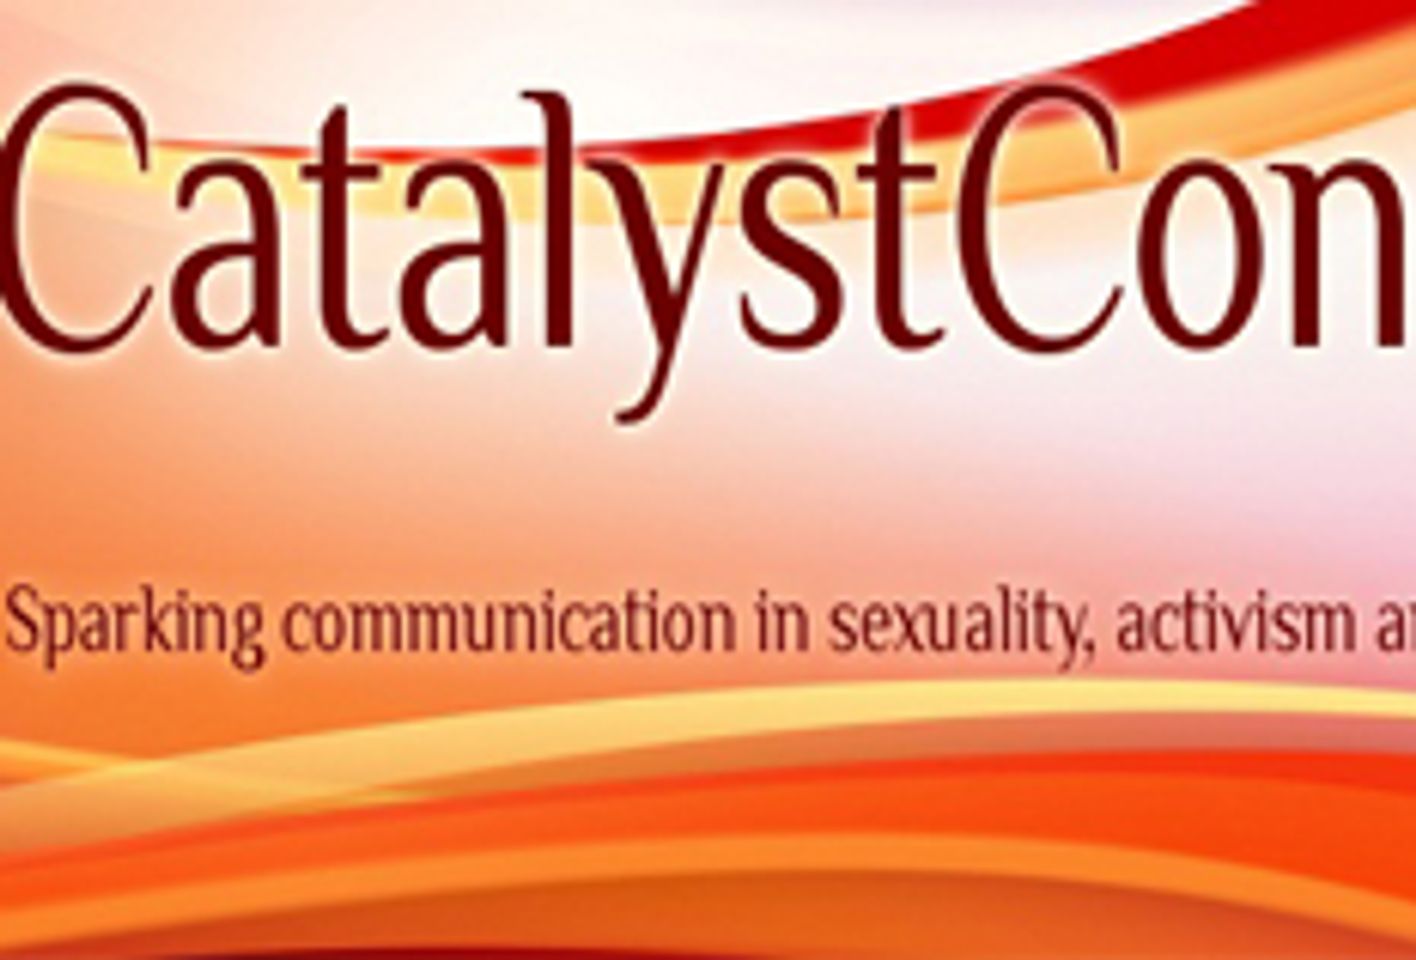 CatalystCon Midwest Focusing On Trans Rights